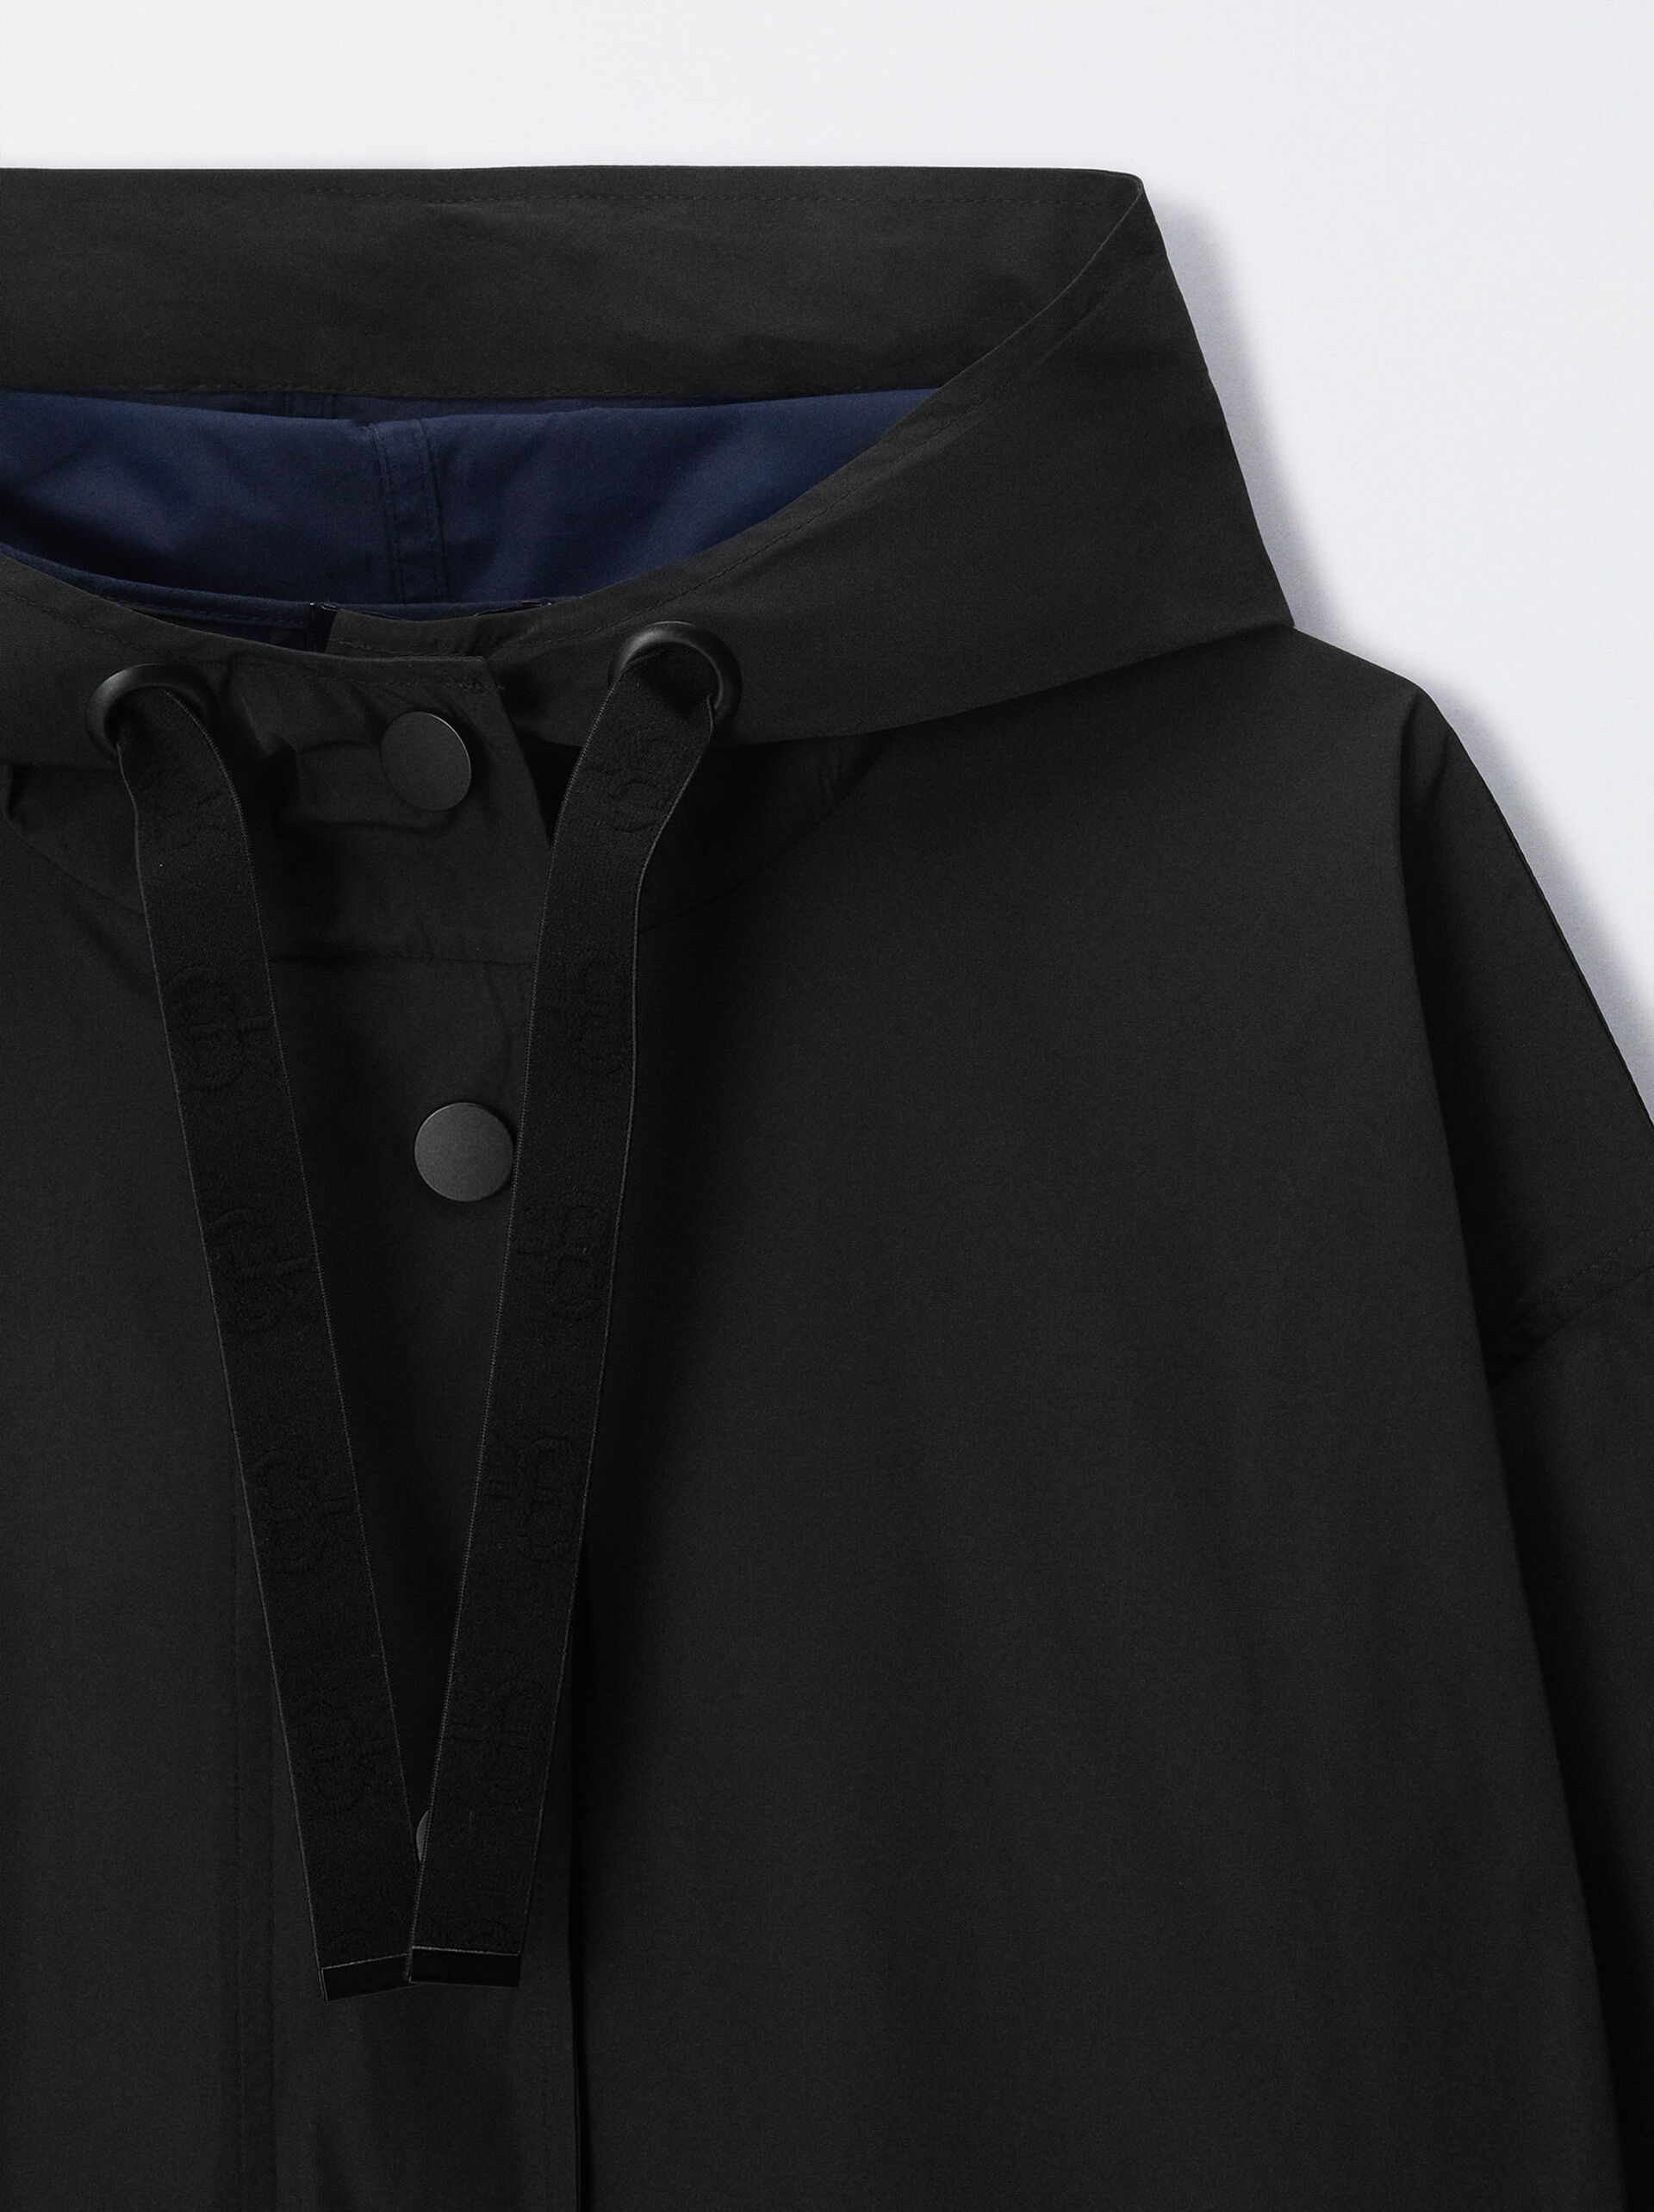 Online Exclusive - Light Parka With Hood image number 2.0